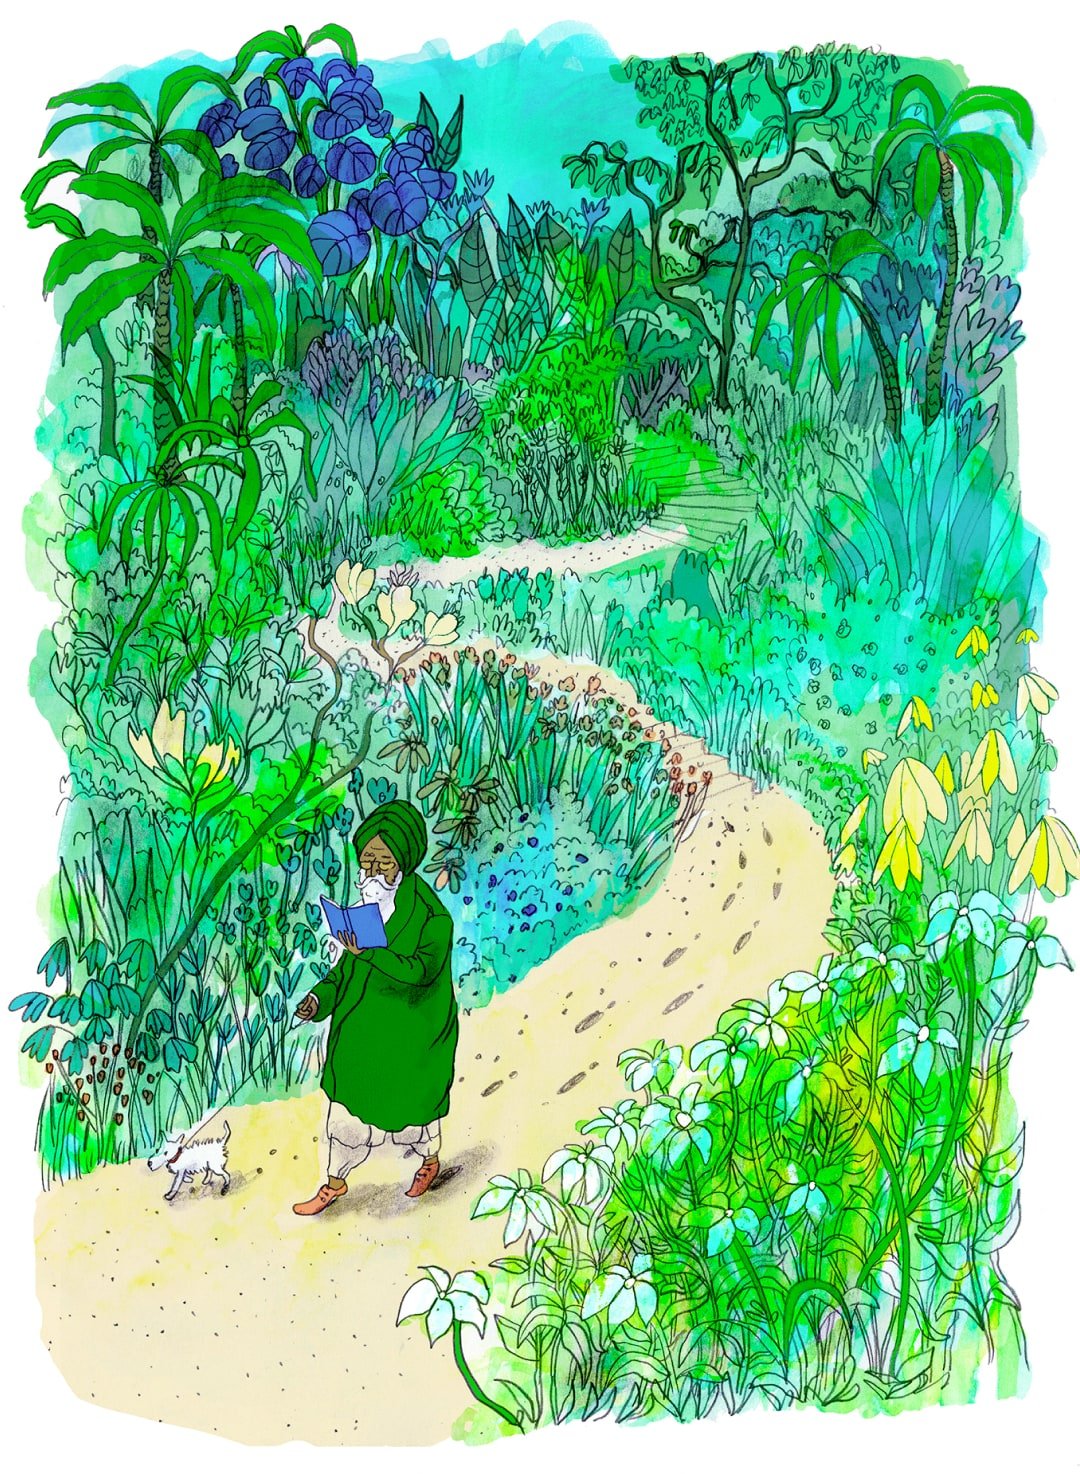 A man with a white beard walks a small white dog along a winding yellow path through a dense jungle of flowers and trees